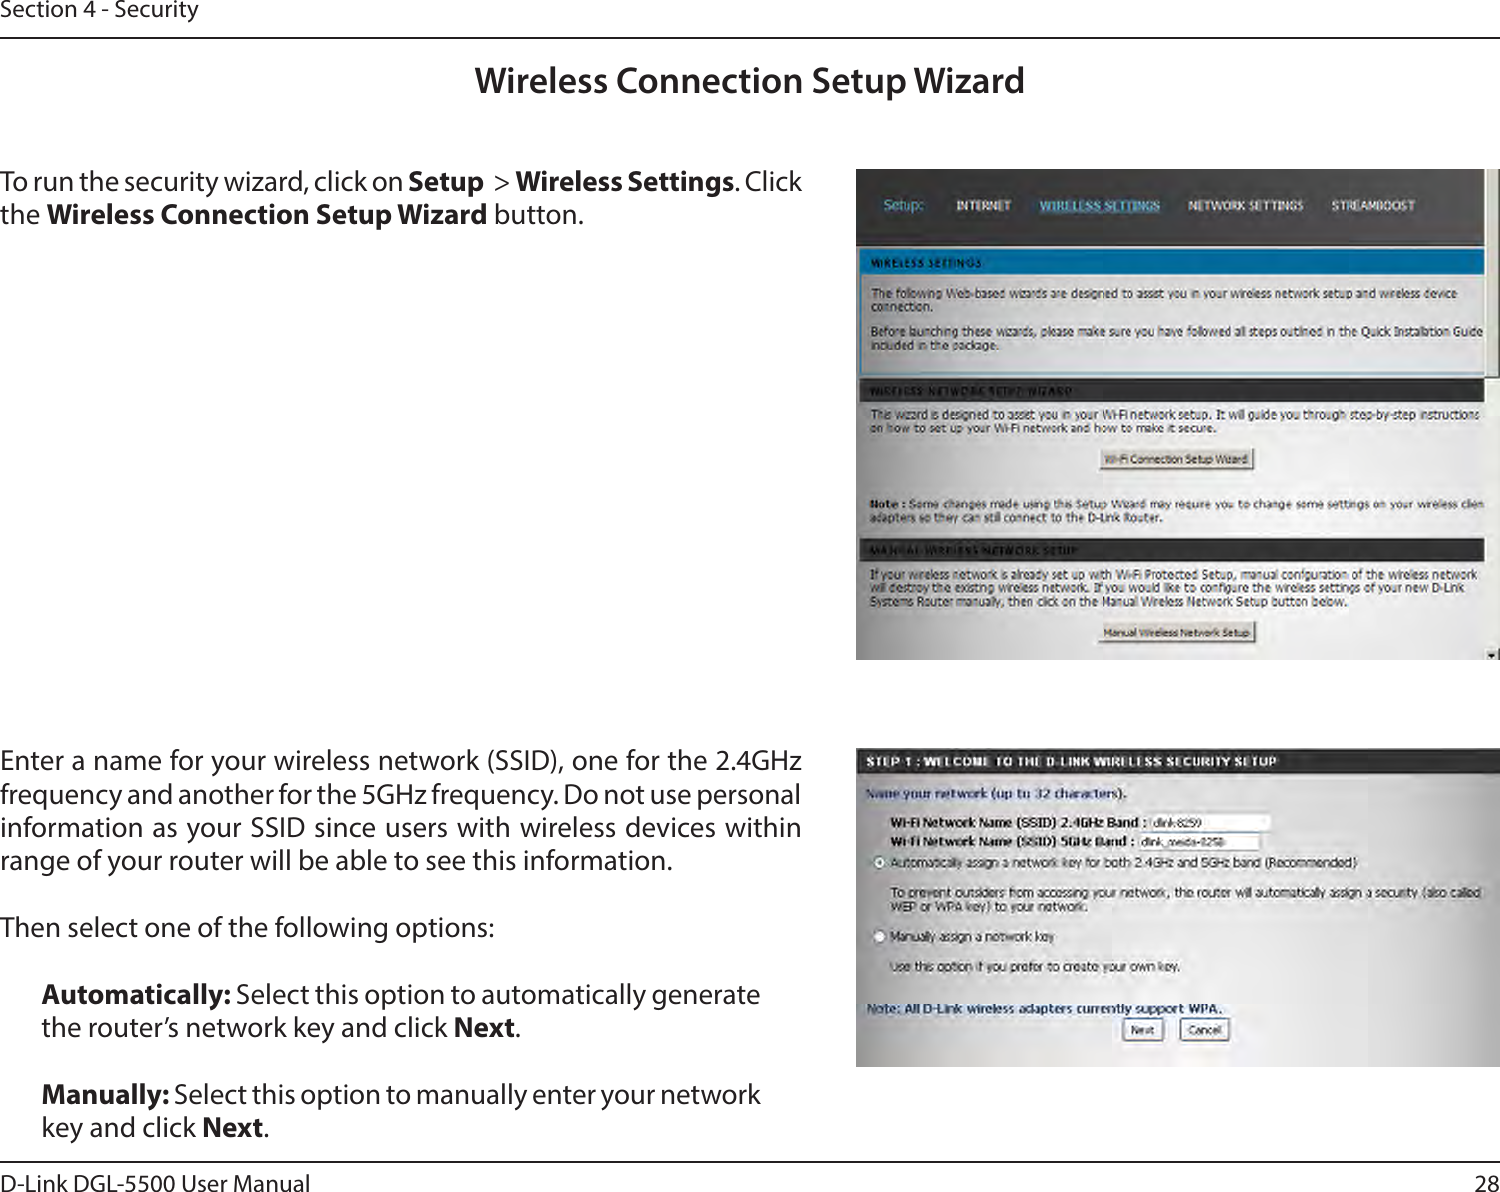 28D-Link DGL-5500 User ManualSection 4 - SecurityWireless Connection Setup WizardTo run the security wizard, click on Setup  &gt; Wireless Settings. Click the Wireless Connection Setup Wizard button.Enter a name for your wireless network (SSID), one for the 2.4GHz frequency and another for the 5GHz frequency. Do not use personal information as your SSID since users with wireless devices within range of your router will be able to see this information.Then select one of the following options: Automatically: Select this option to automatically generate the router’s network key and click Next.Manually: Select this option to manually enter your network key and click Next.